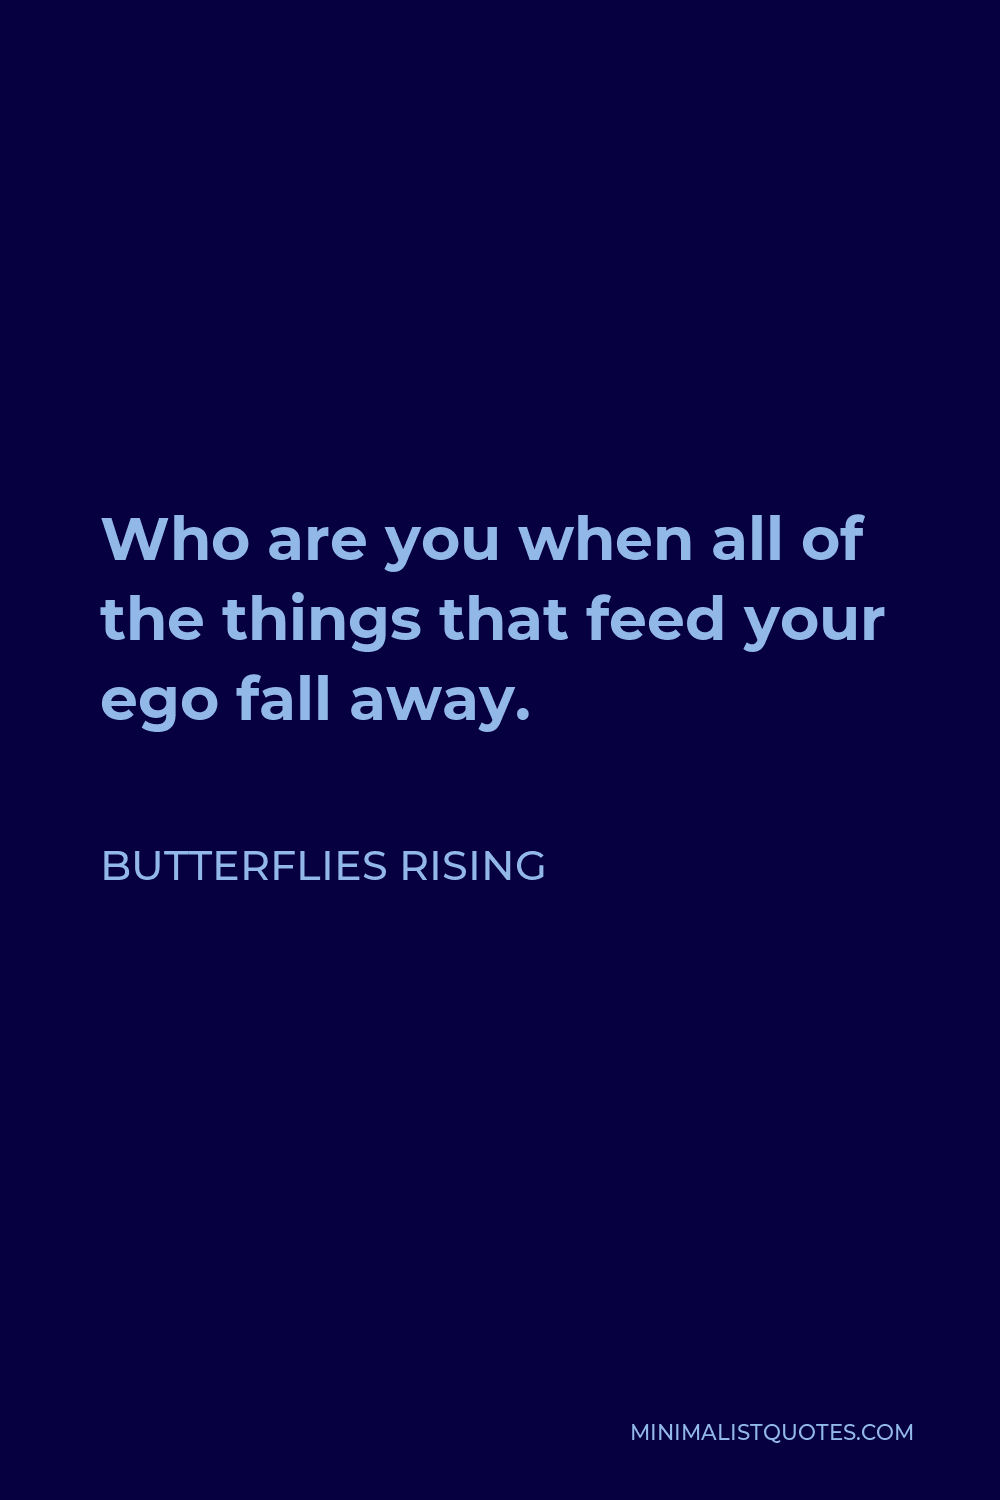 Butterflies Rising Quote - Who are you when all of the things that feed your ego fall away.